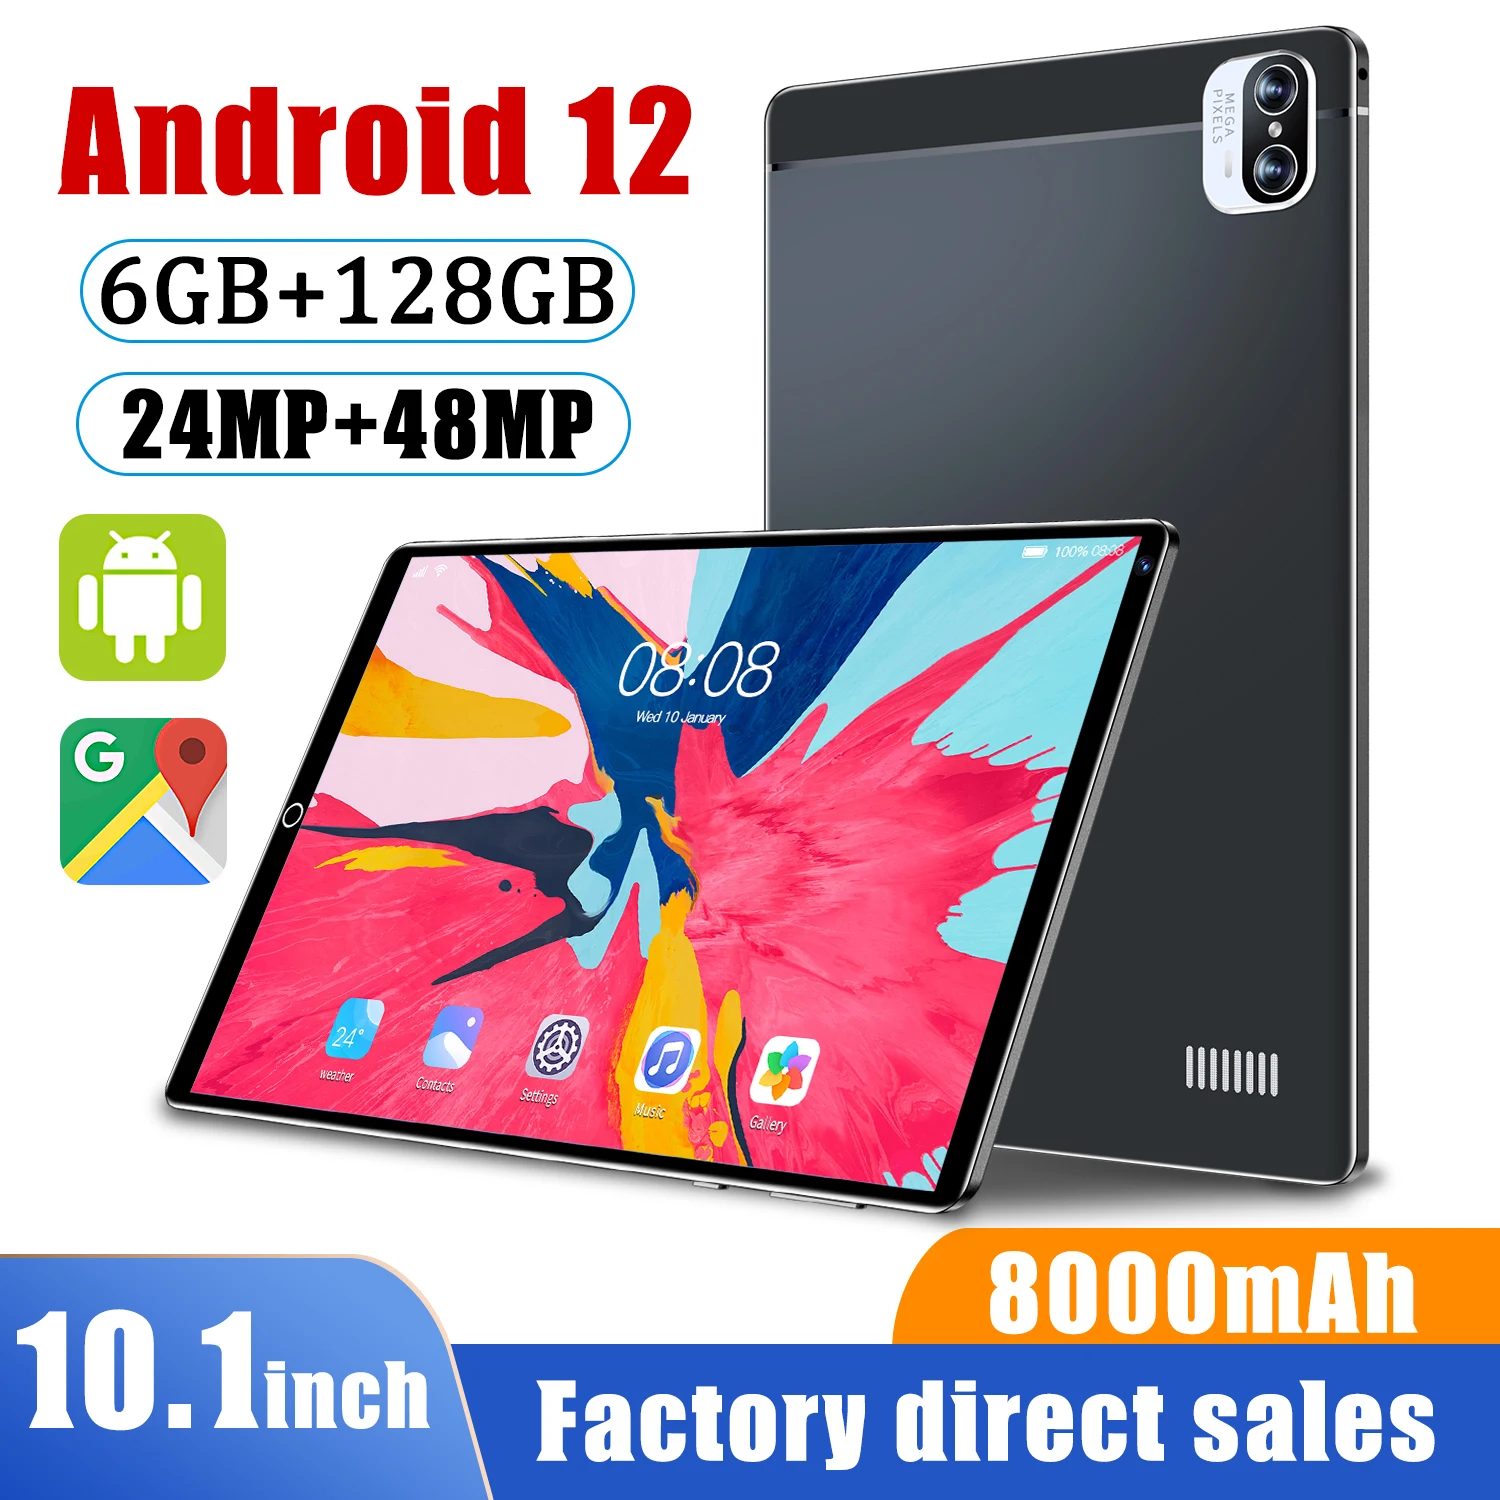 

128GB Tablet X5 8.1Inch Cheap Dual SIM Notebook Deca Core Laptop 24MP+48MP 6GB Google Play 5G LTE 8000mAh GPS Android 12 Pad Pro